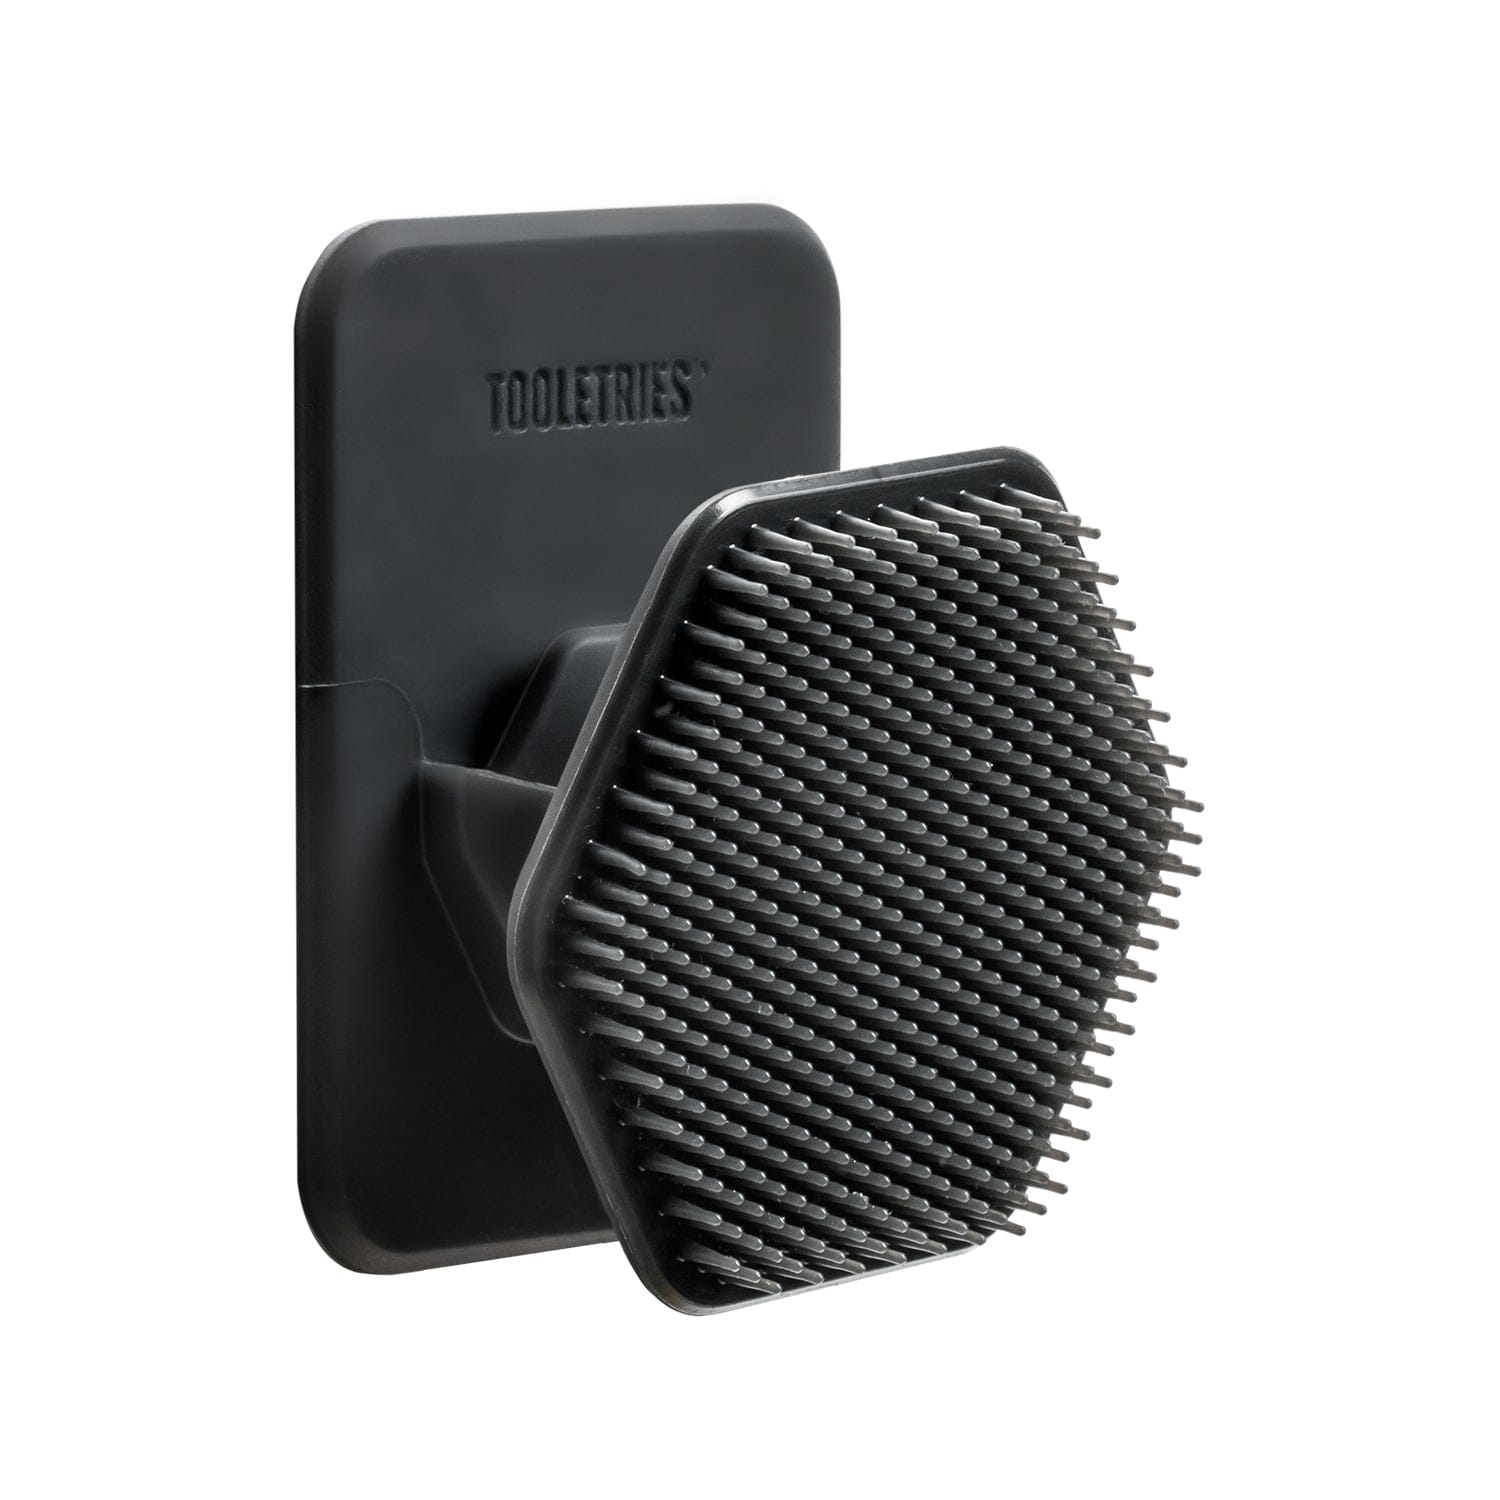 Tooletries Face Scrubber & Holder (Gentle Cleanse)